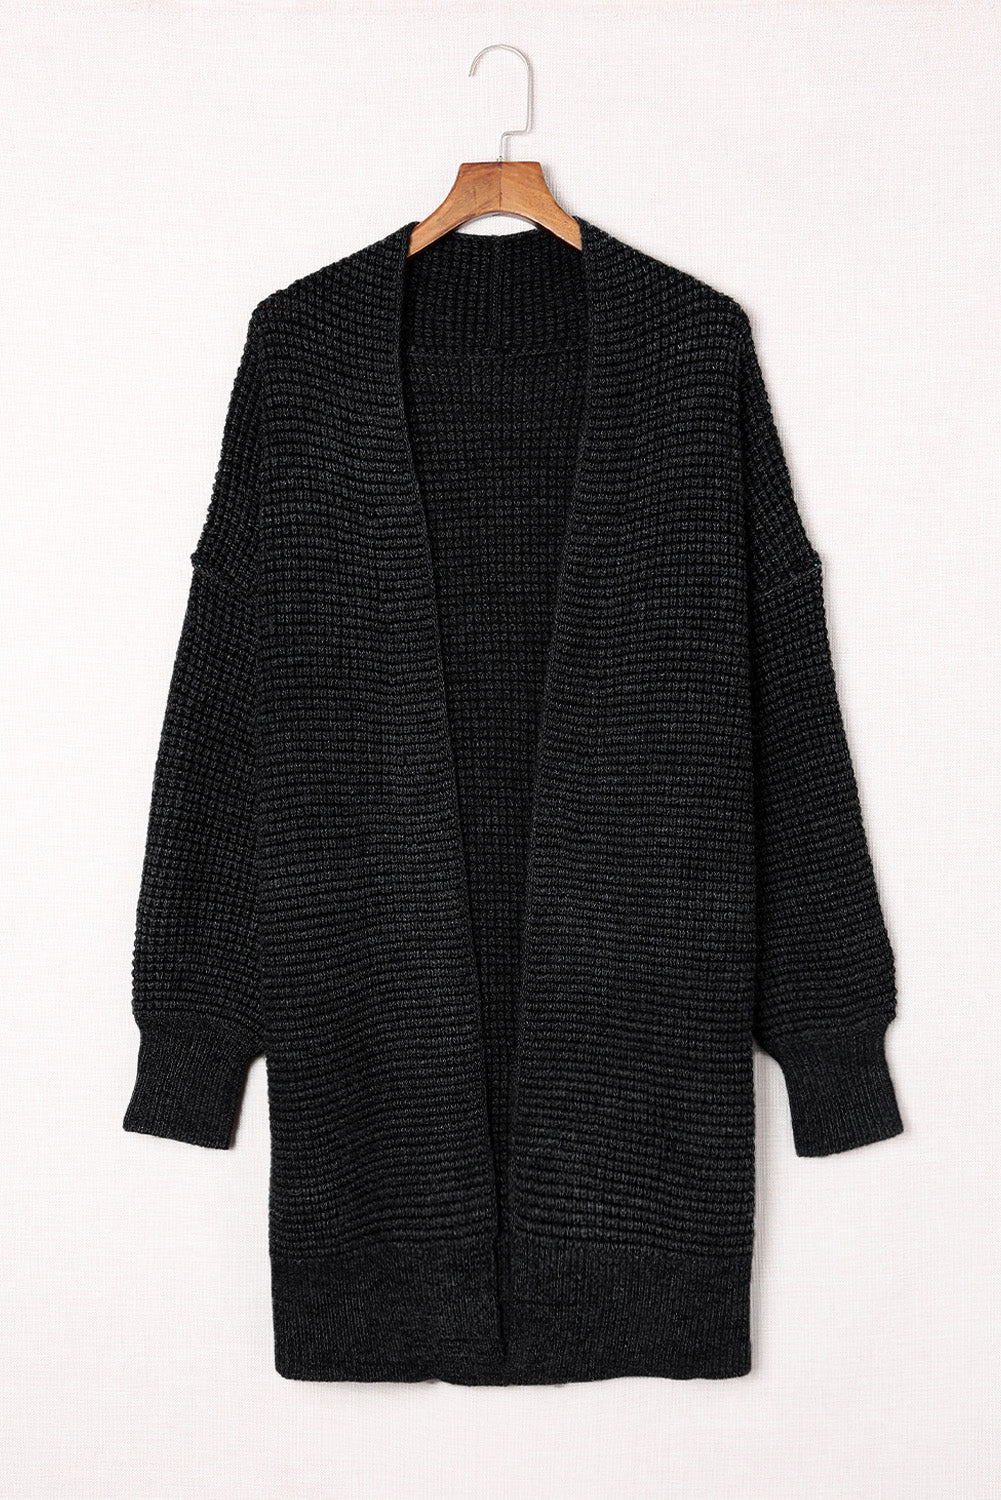 Heathered Open Front Longline Cardigan - Black / S - Women’s Clothing & Accessories - Shirts & Tops - 20 - 2024